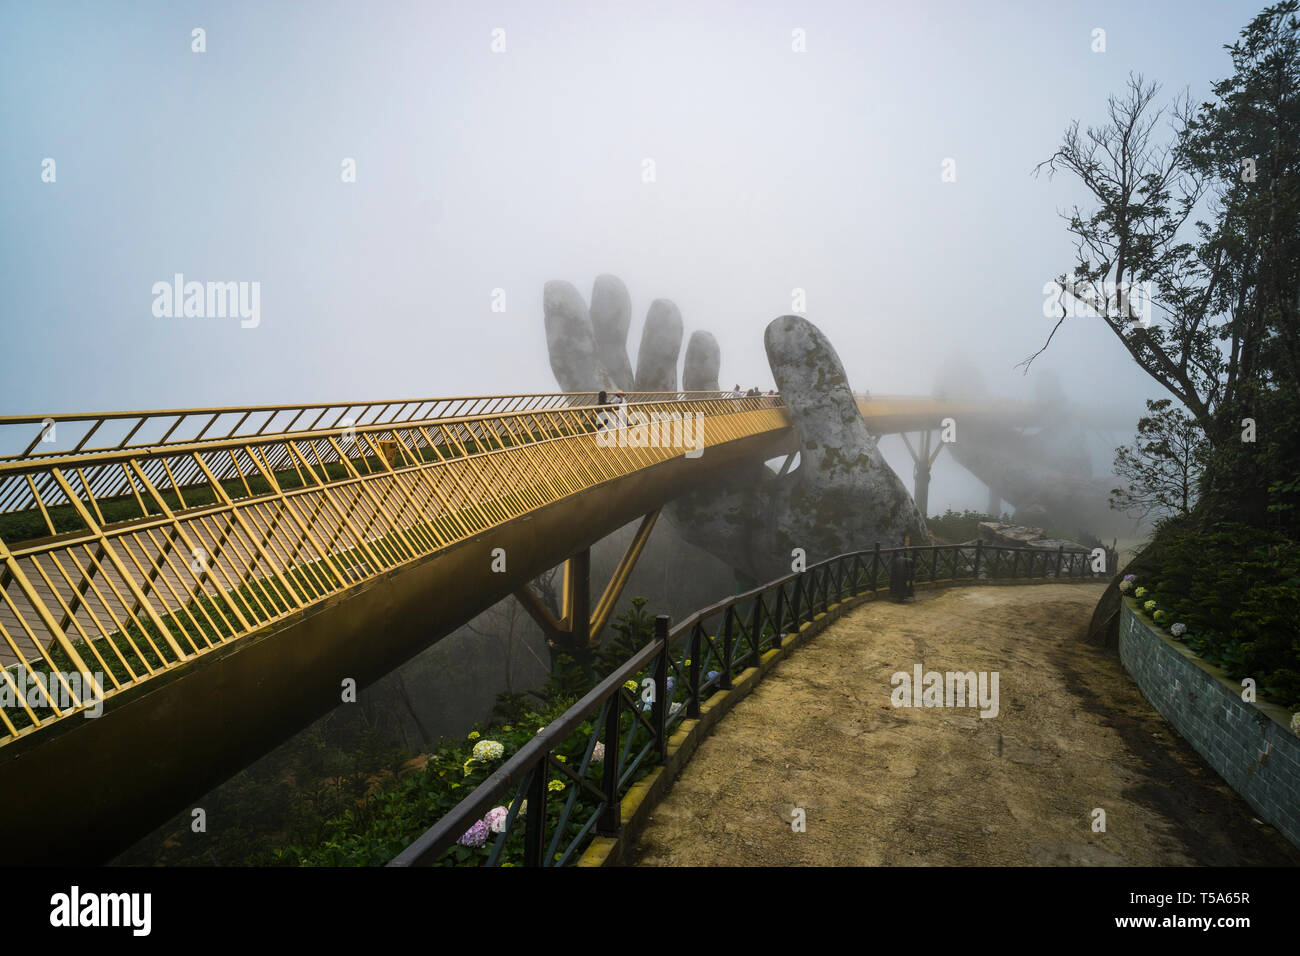 Ba Na Hill mountain resort, Danang city, Vietnam. The Golden Bridge is lifted by two giant hands in the tourist resort on Ba Na Hill in a foggy day at Stock Photo